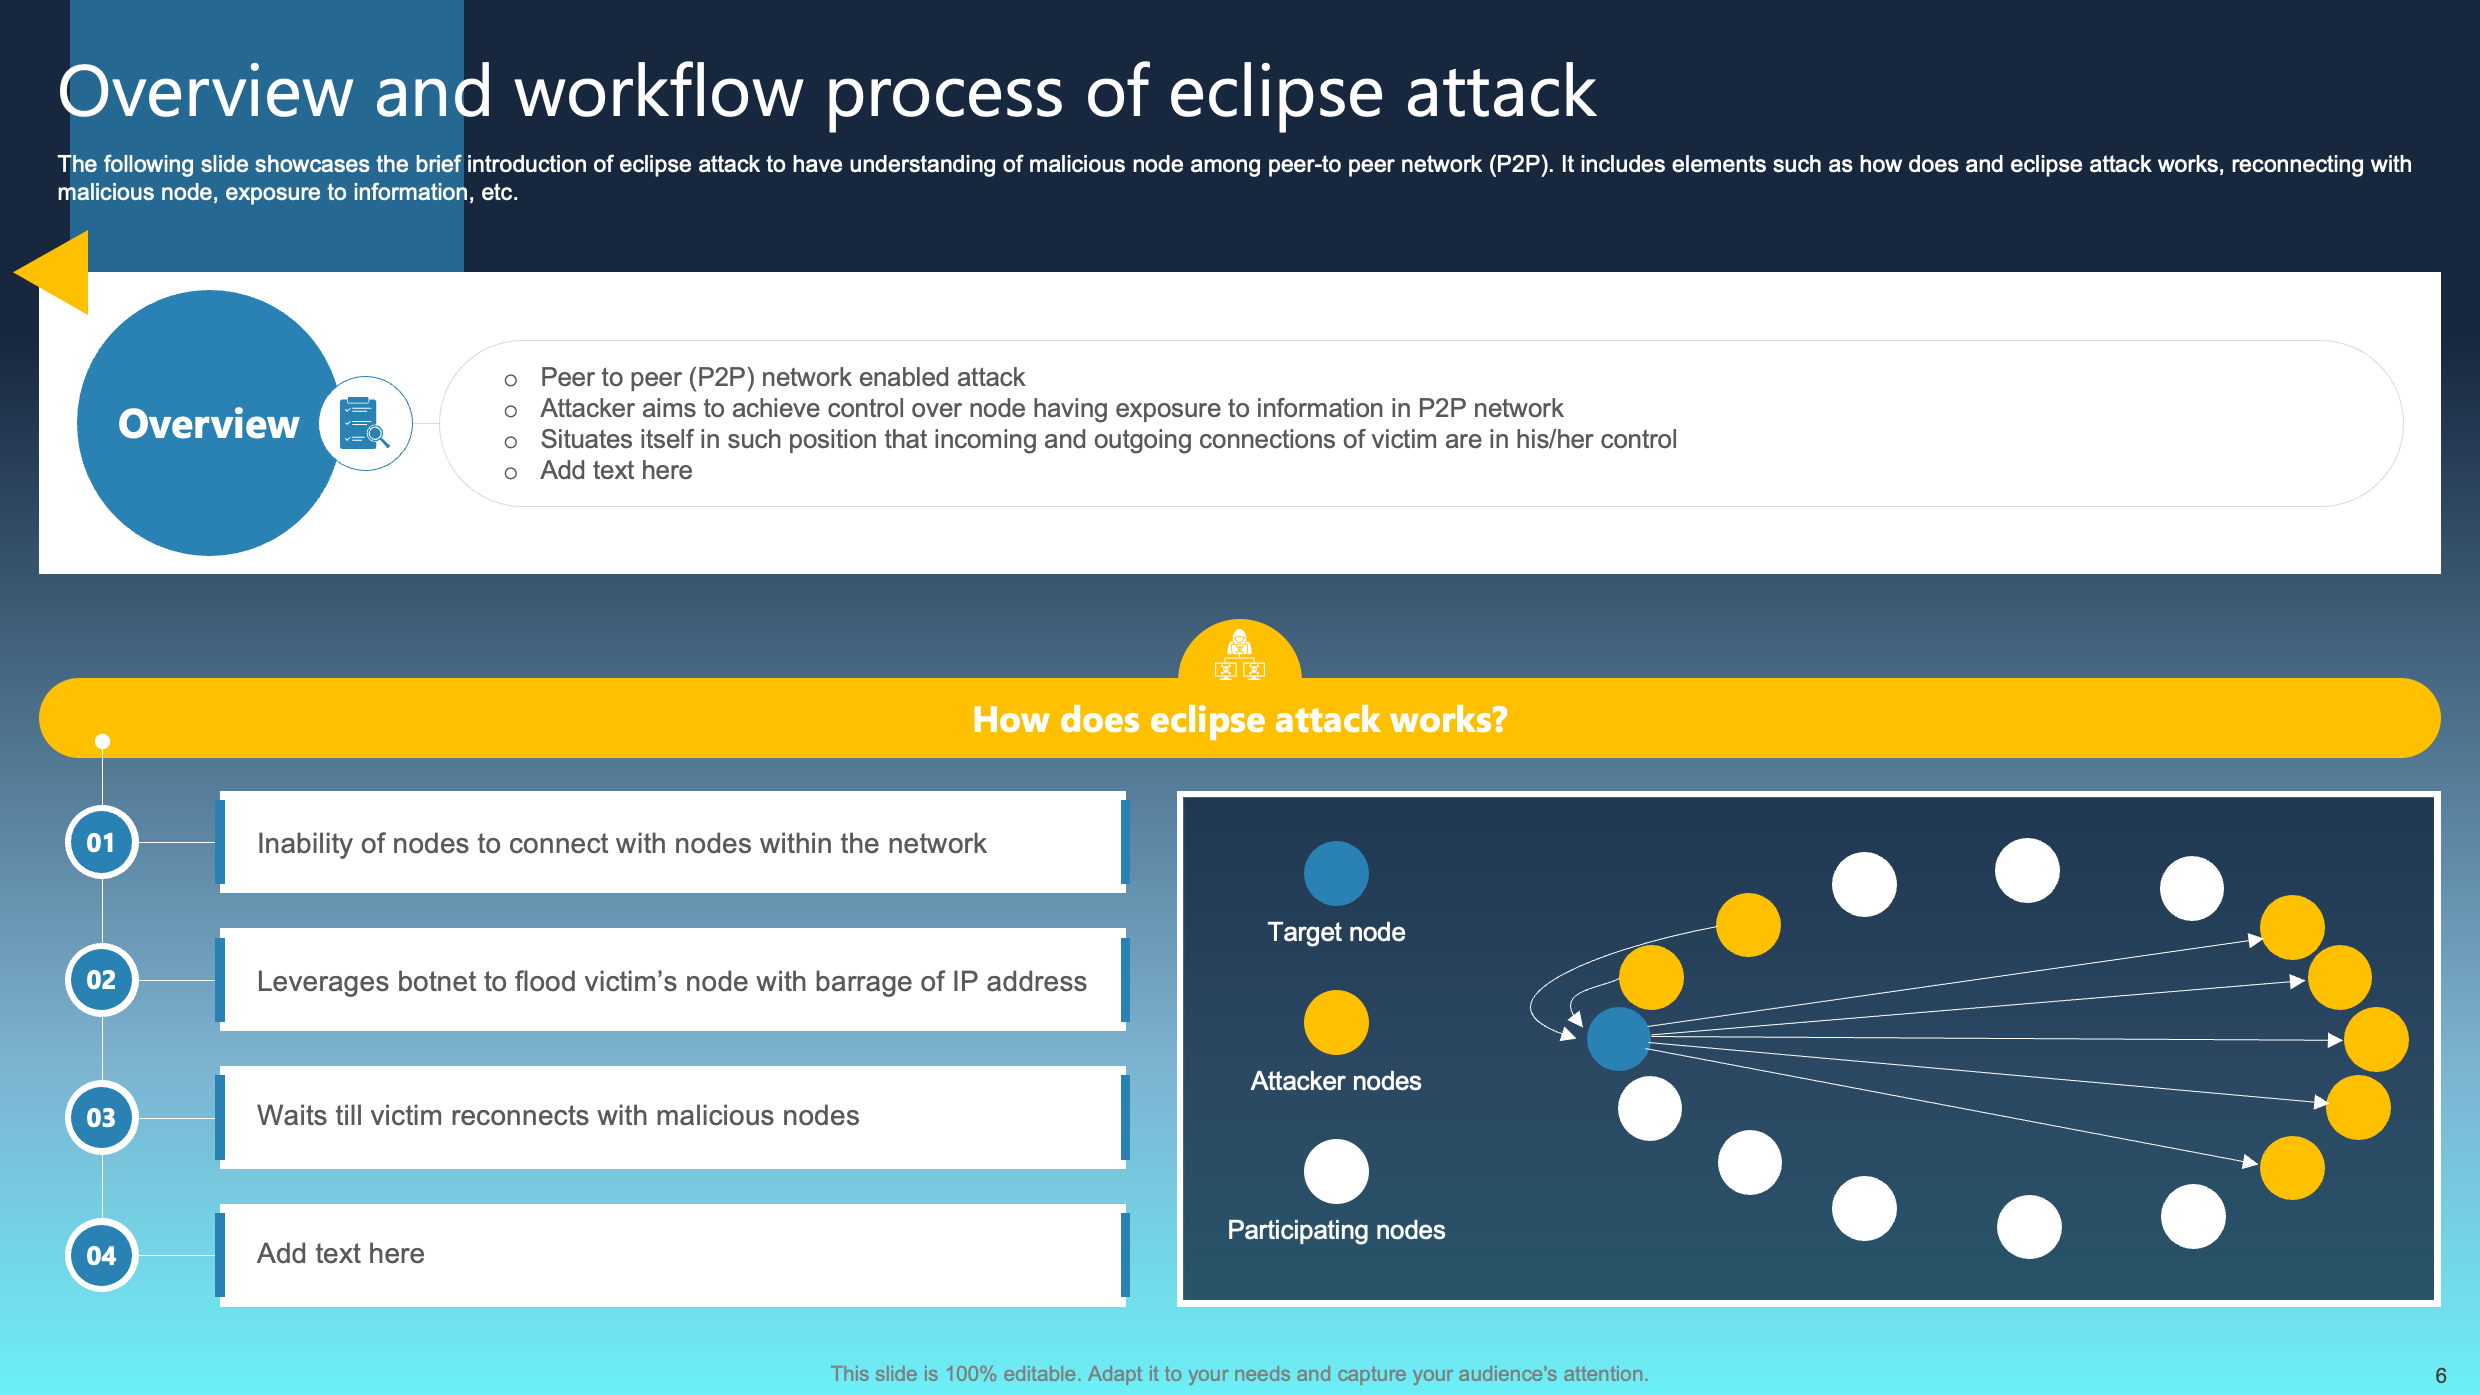 Overview and Workflow Process of Eclipse Attack